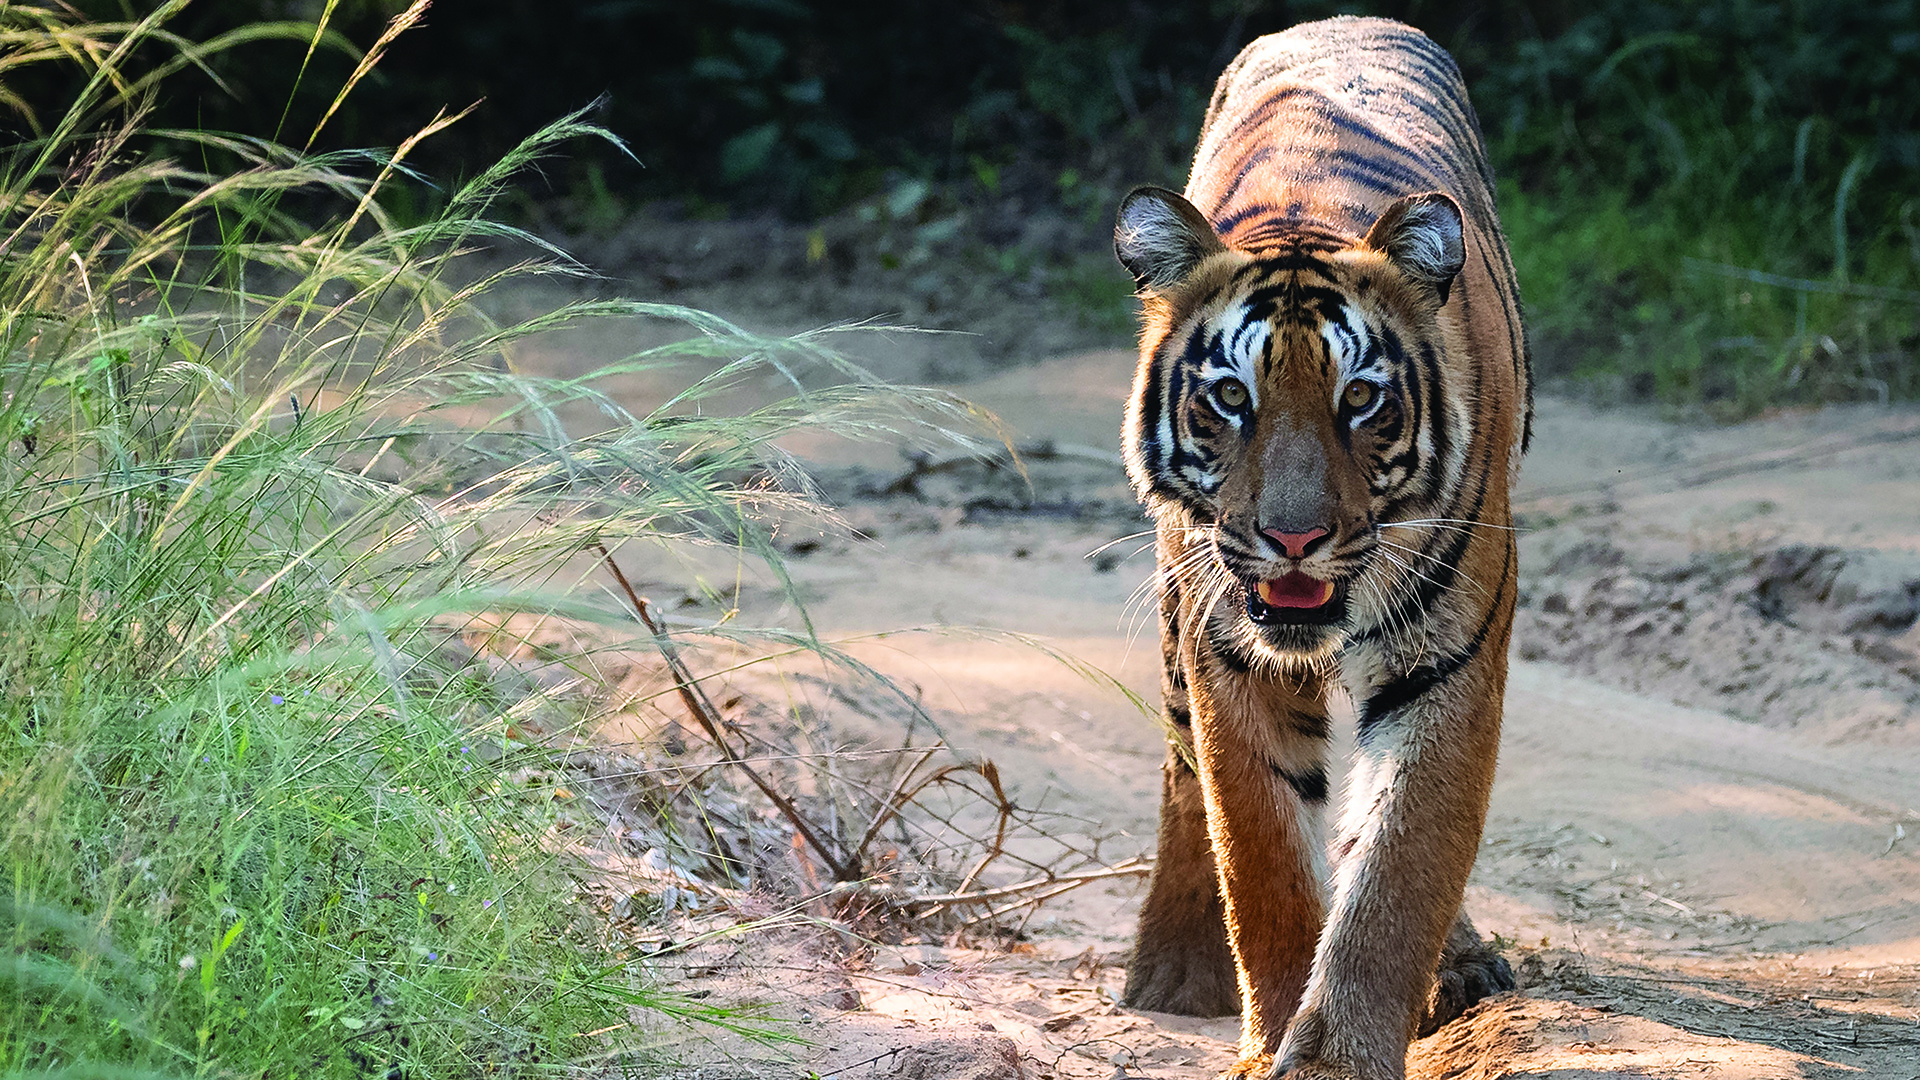 A tiger walks down a pathway towards the camera